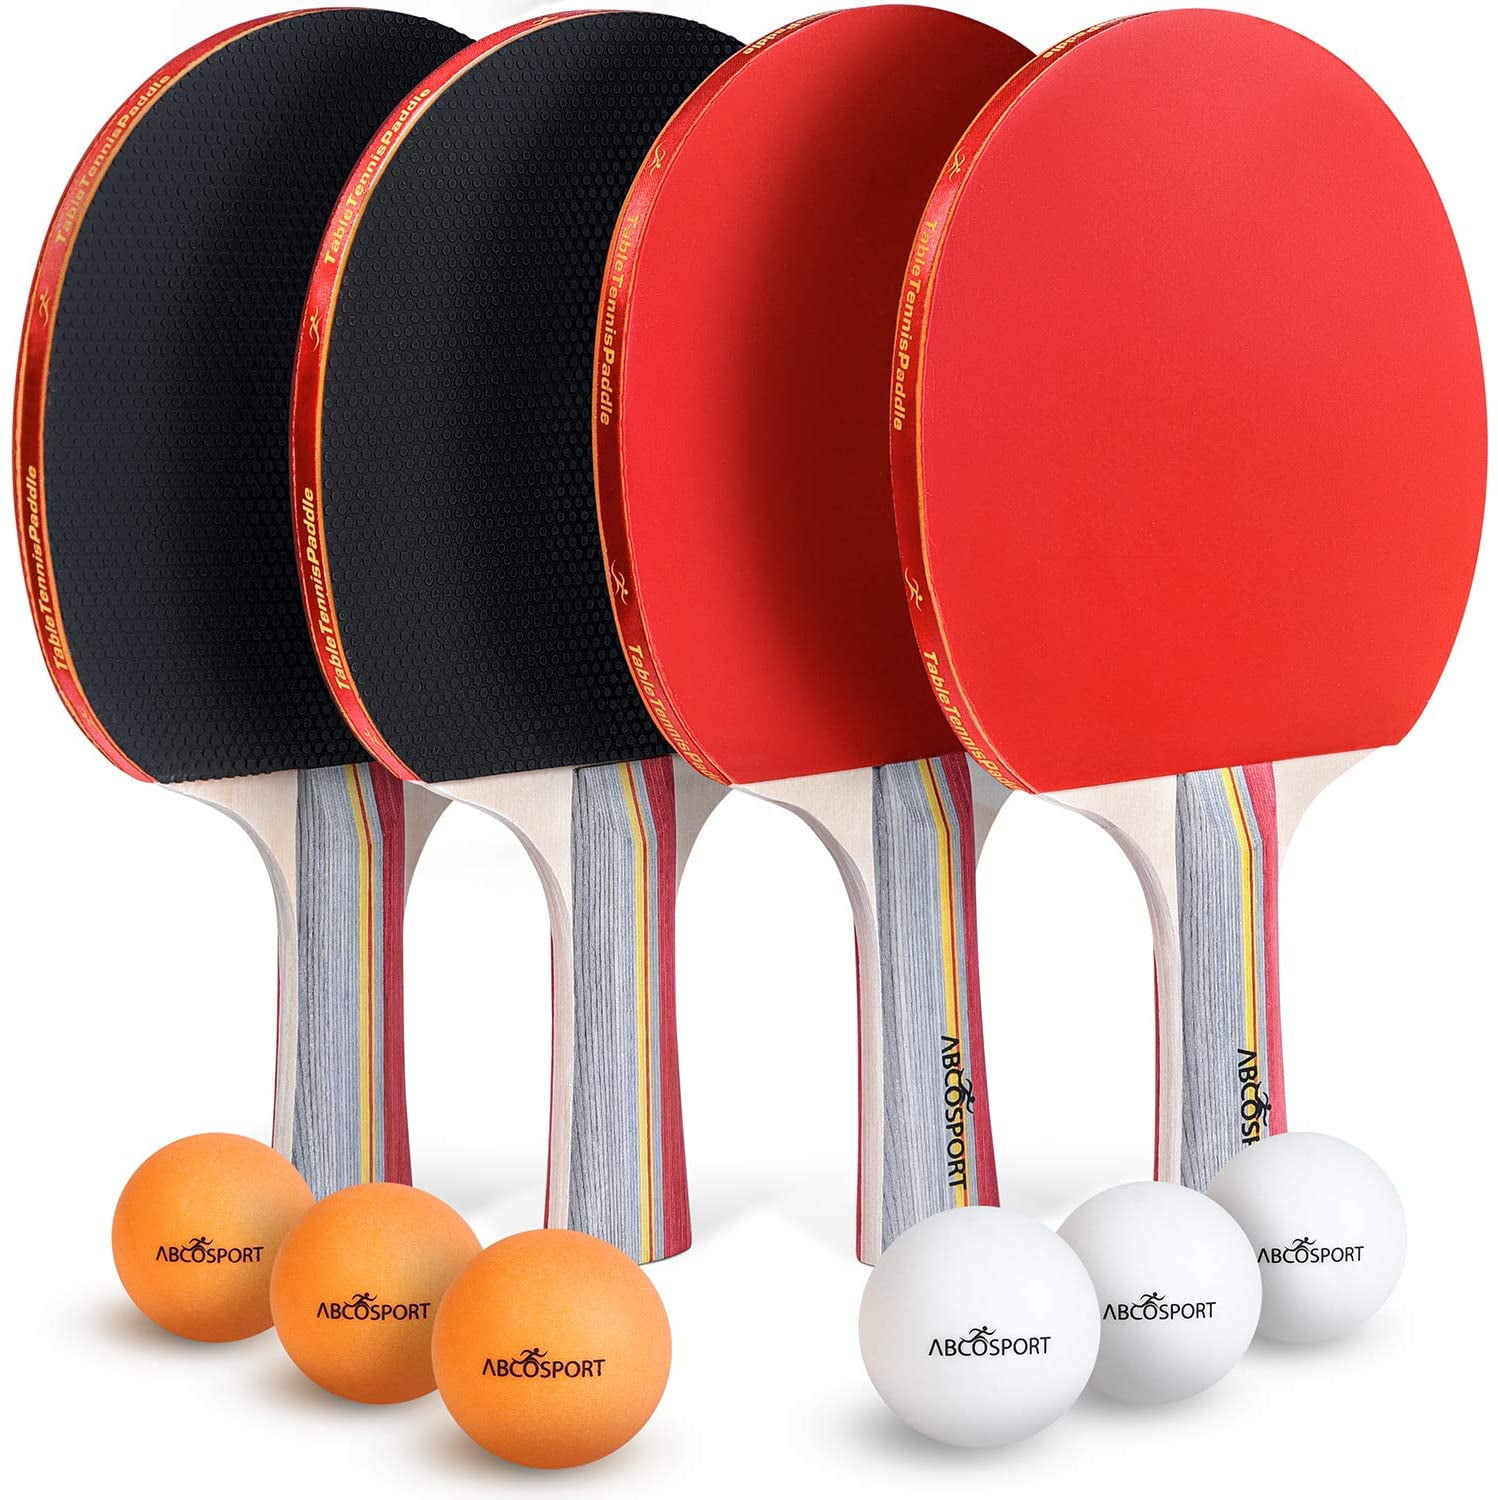 In hand IMMEDIATE DISPATCH Hy-Pro 2 Bats and 2 Balls Table Tennis Set 